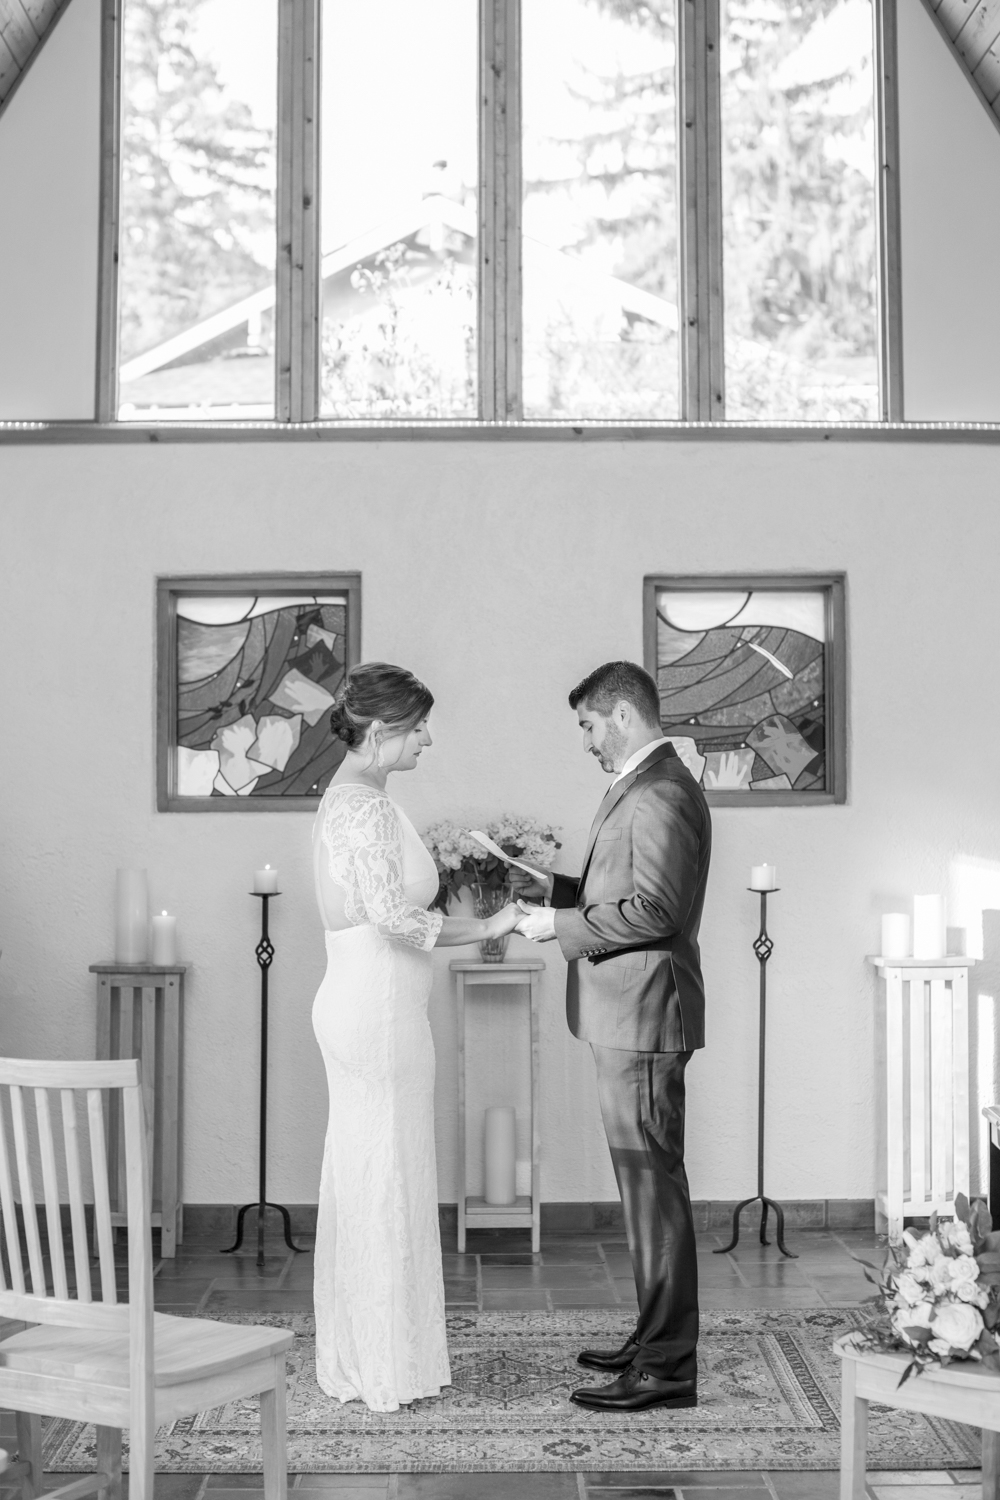 Couple reading vows at altar